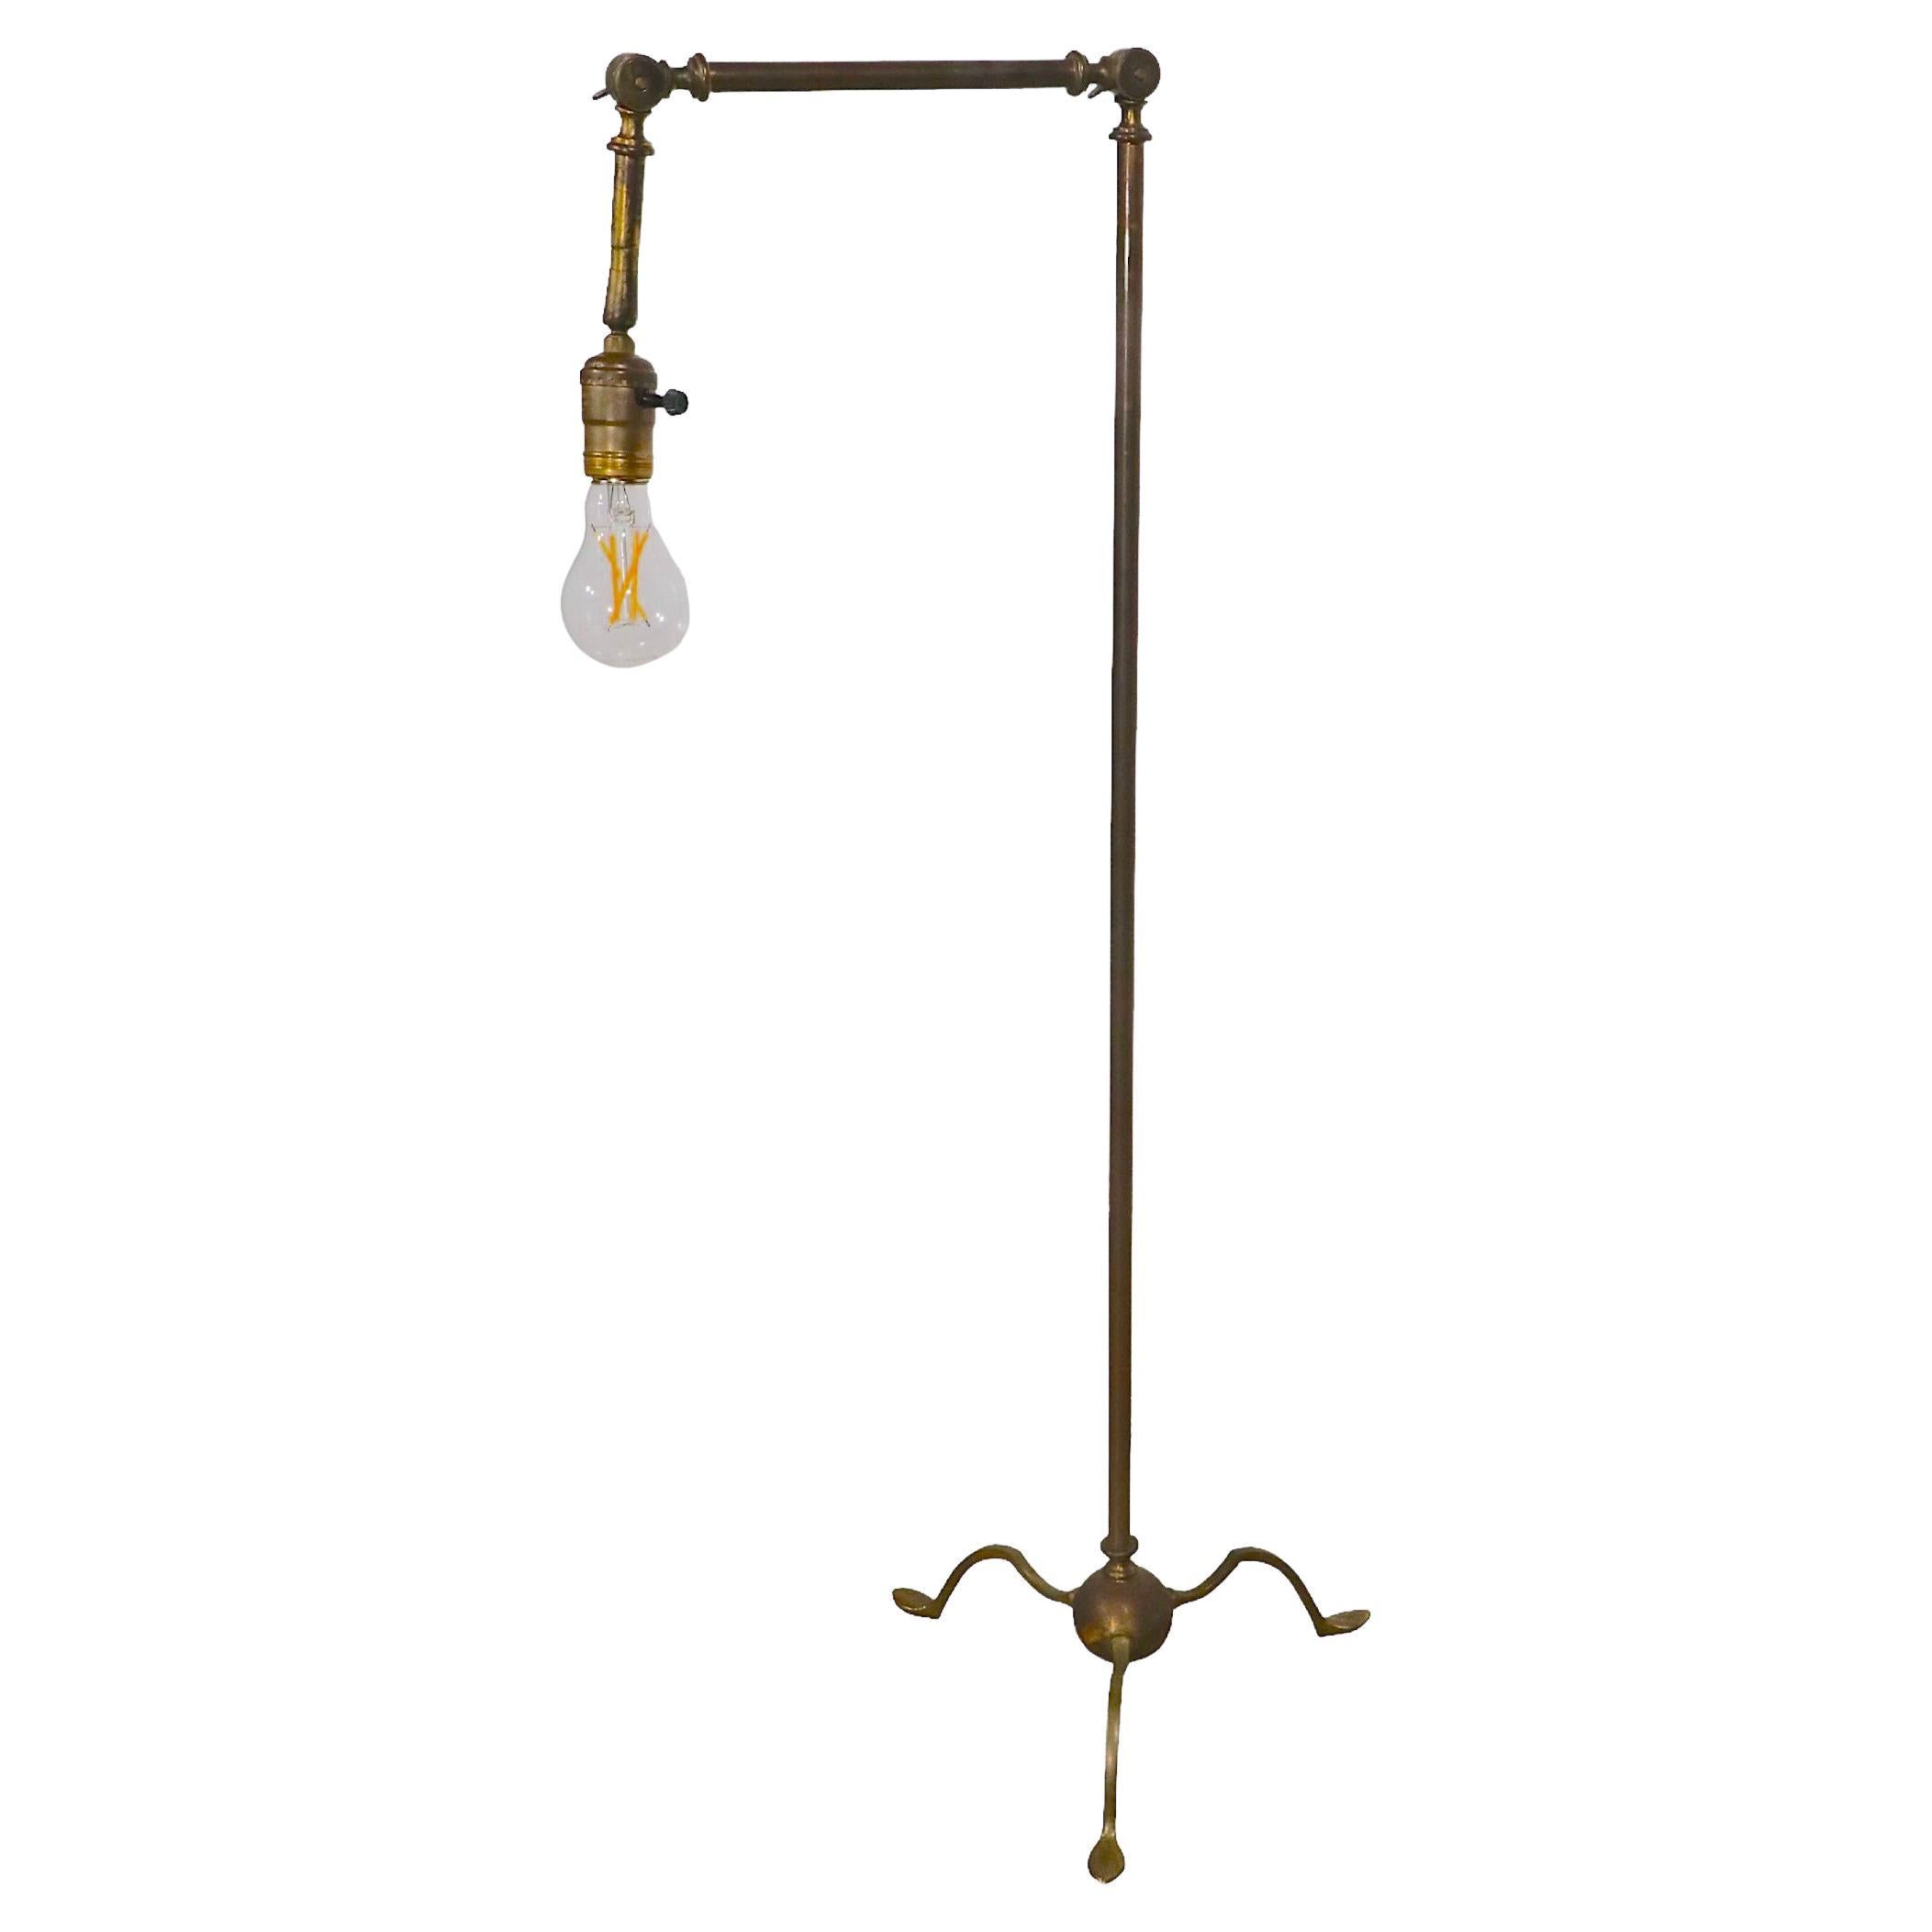 Articulating Brass Reading Floor Lamp in the Classical Style, C. 1900- 1930's For Sale